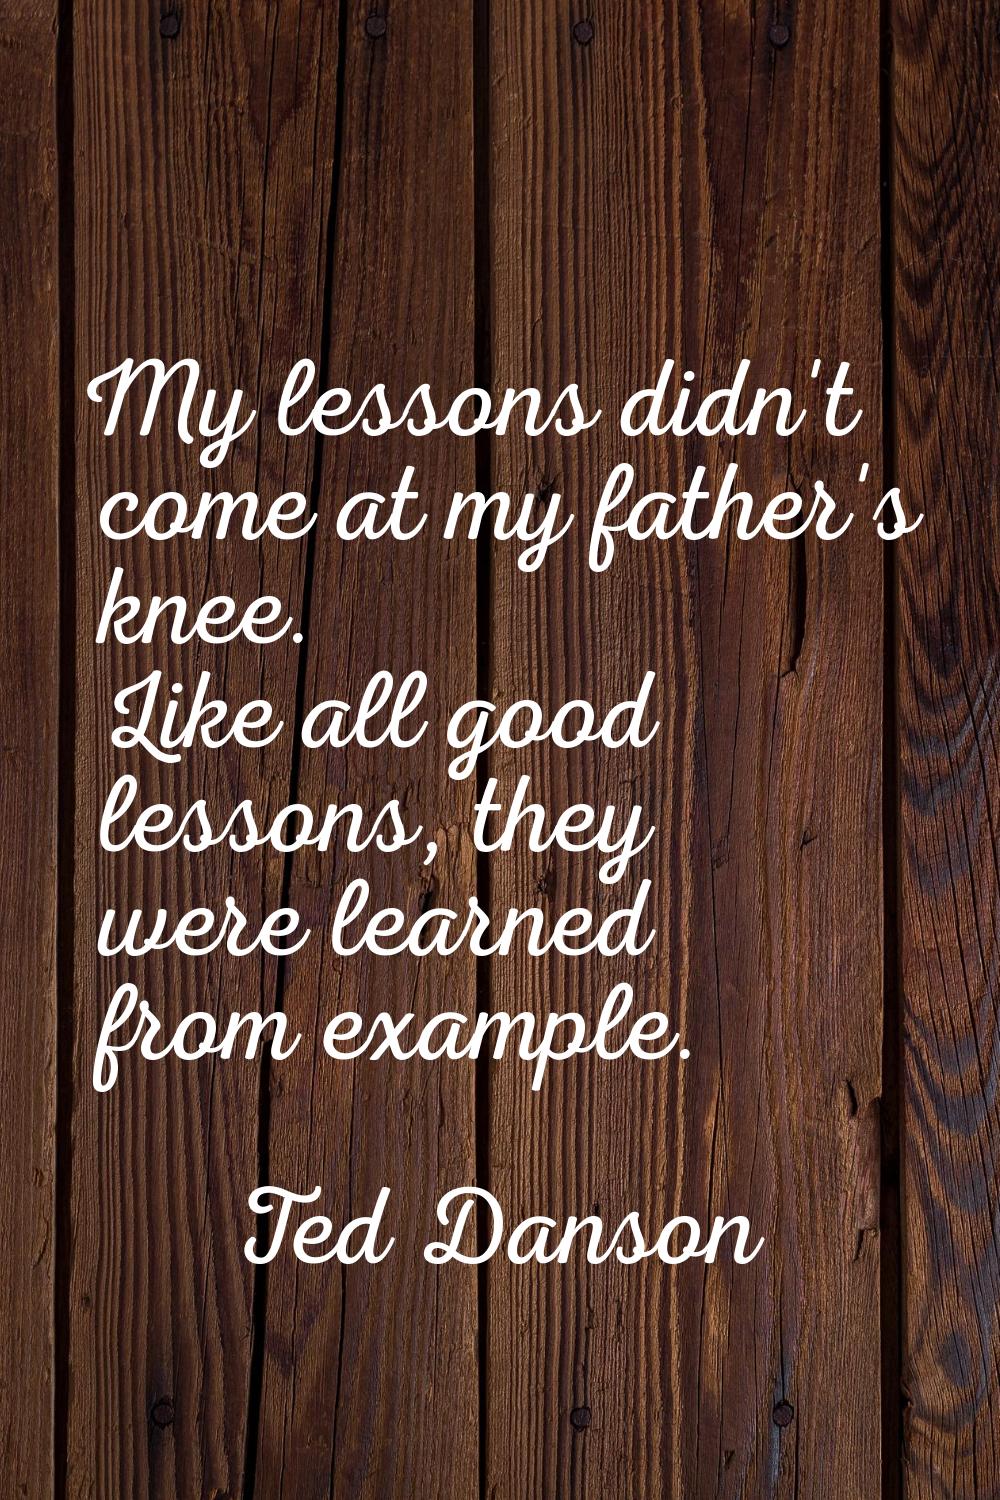 My lessons didn't come at my father's knee. Like all good lessons, they were learned from example.